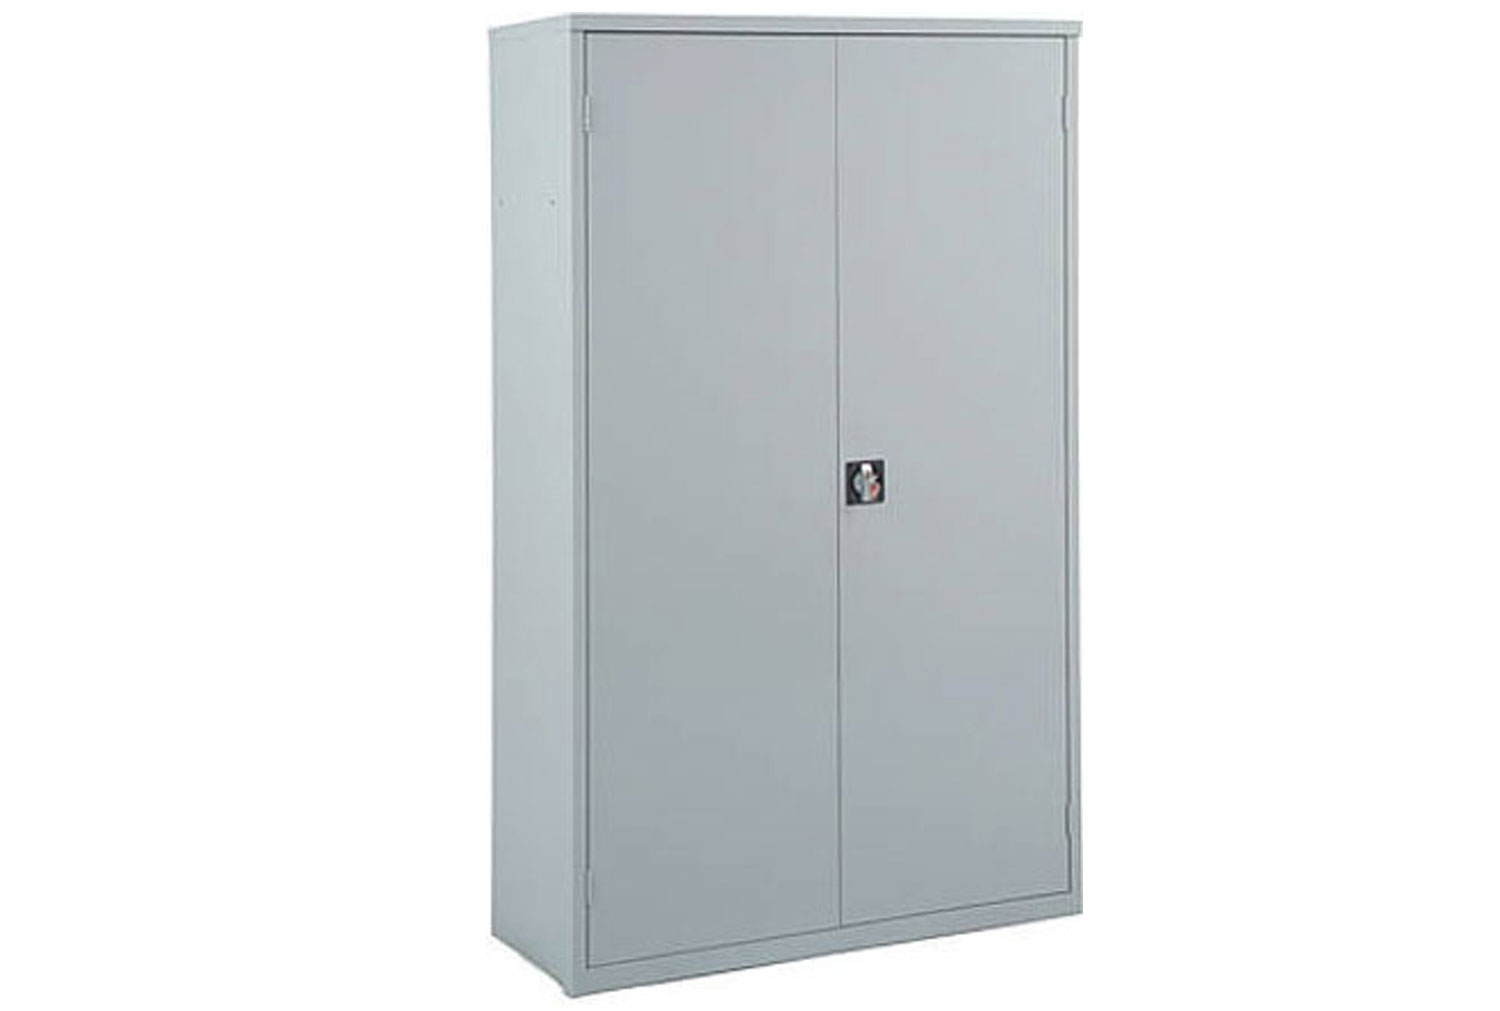 Lockable Storage Cupboard With 63 Gratnells Trays, Grey Trays, Express Delivery